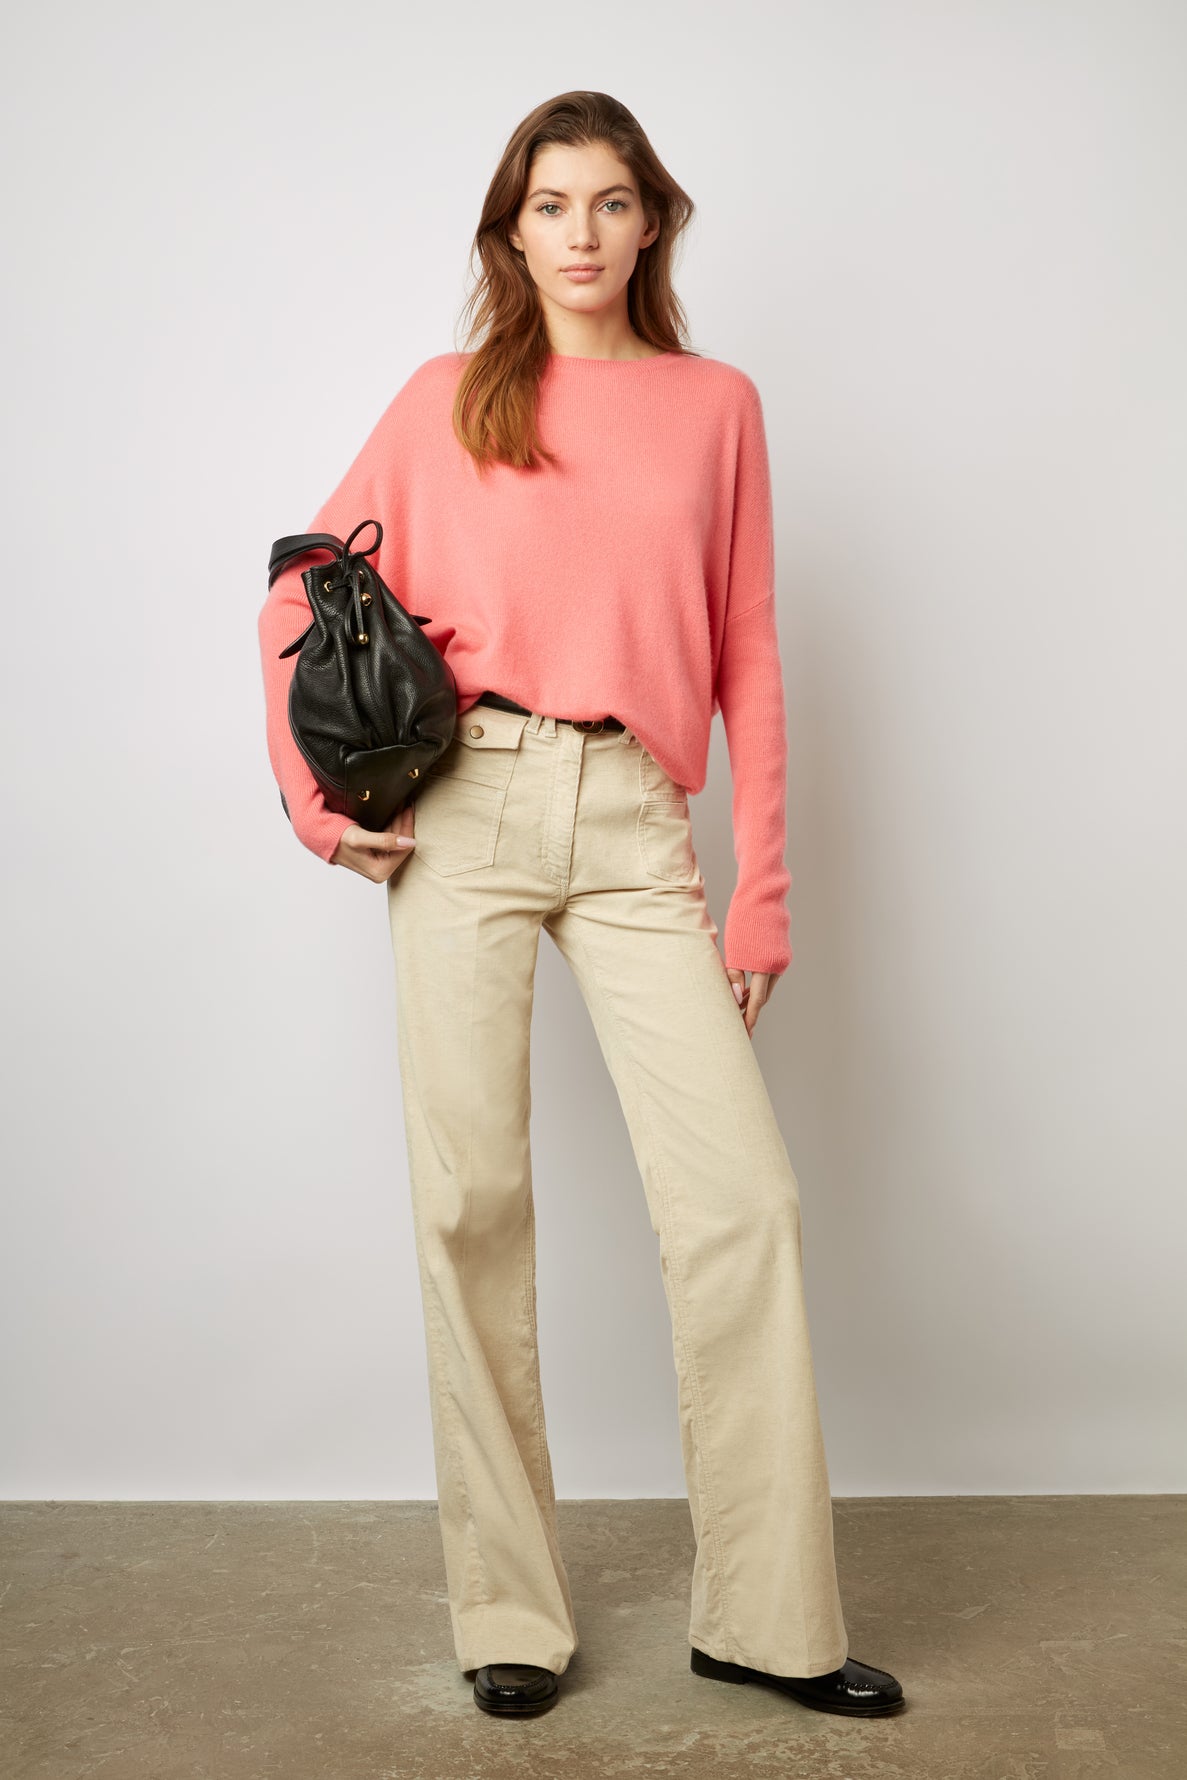 Pants & jeans for women | Gerard Darel | Page 1